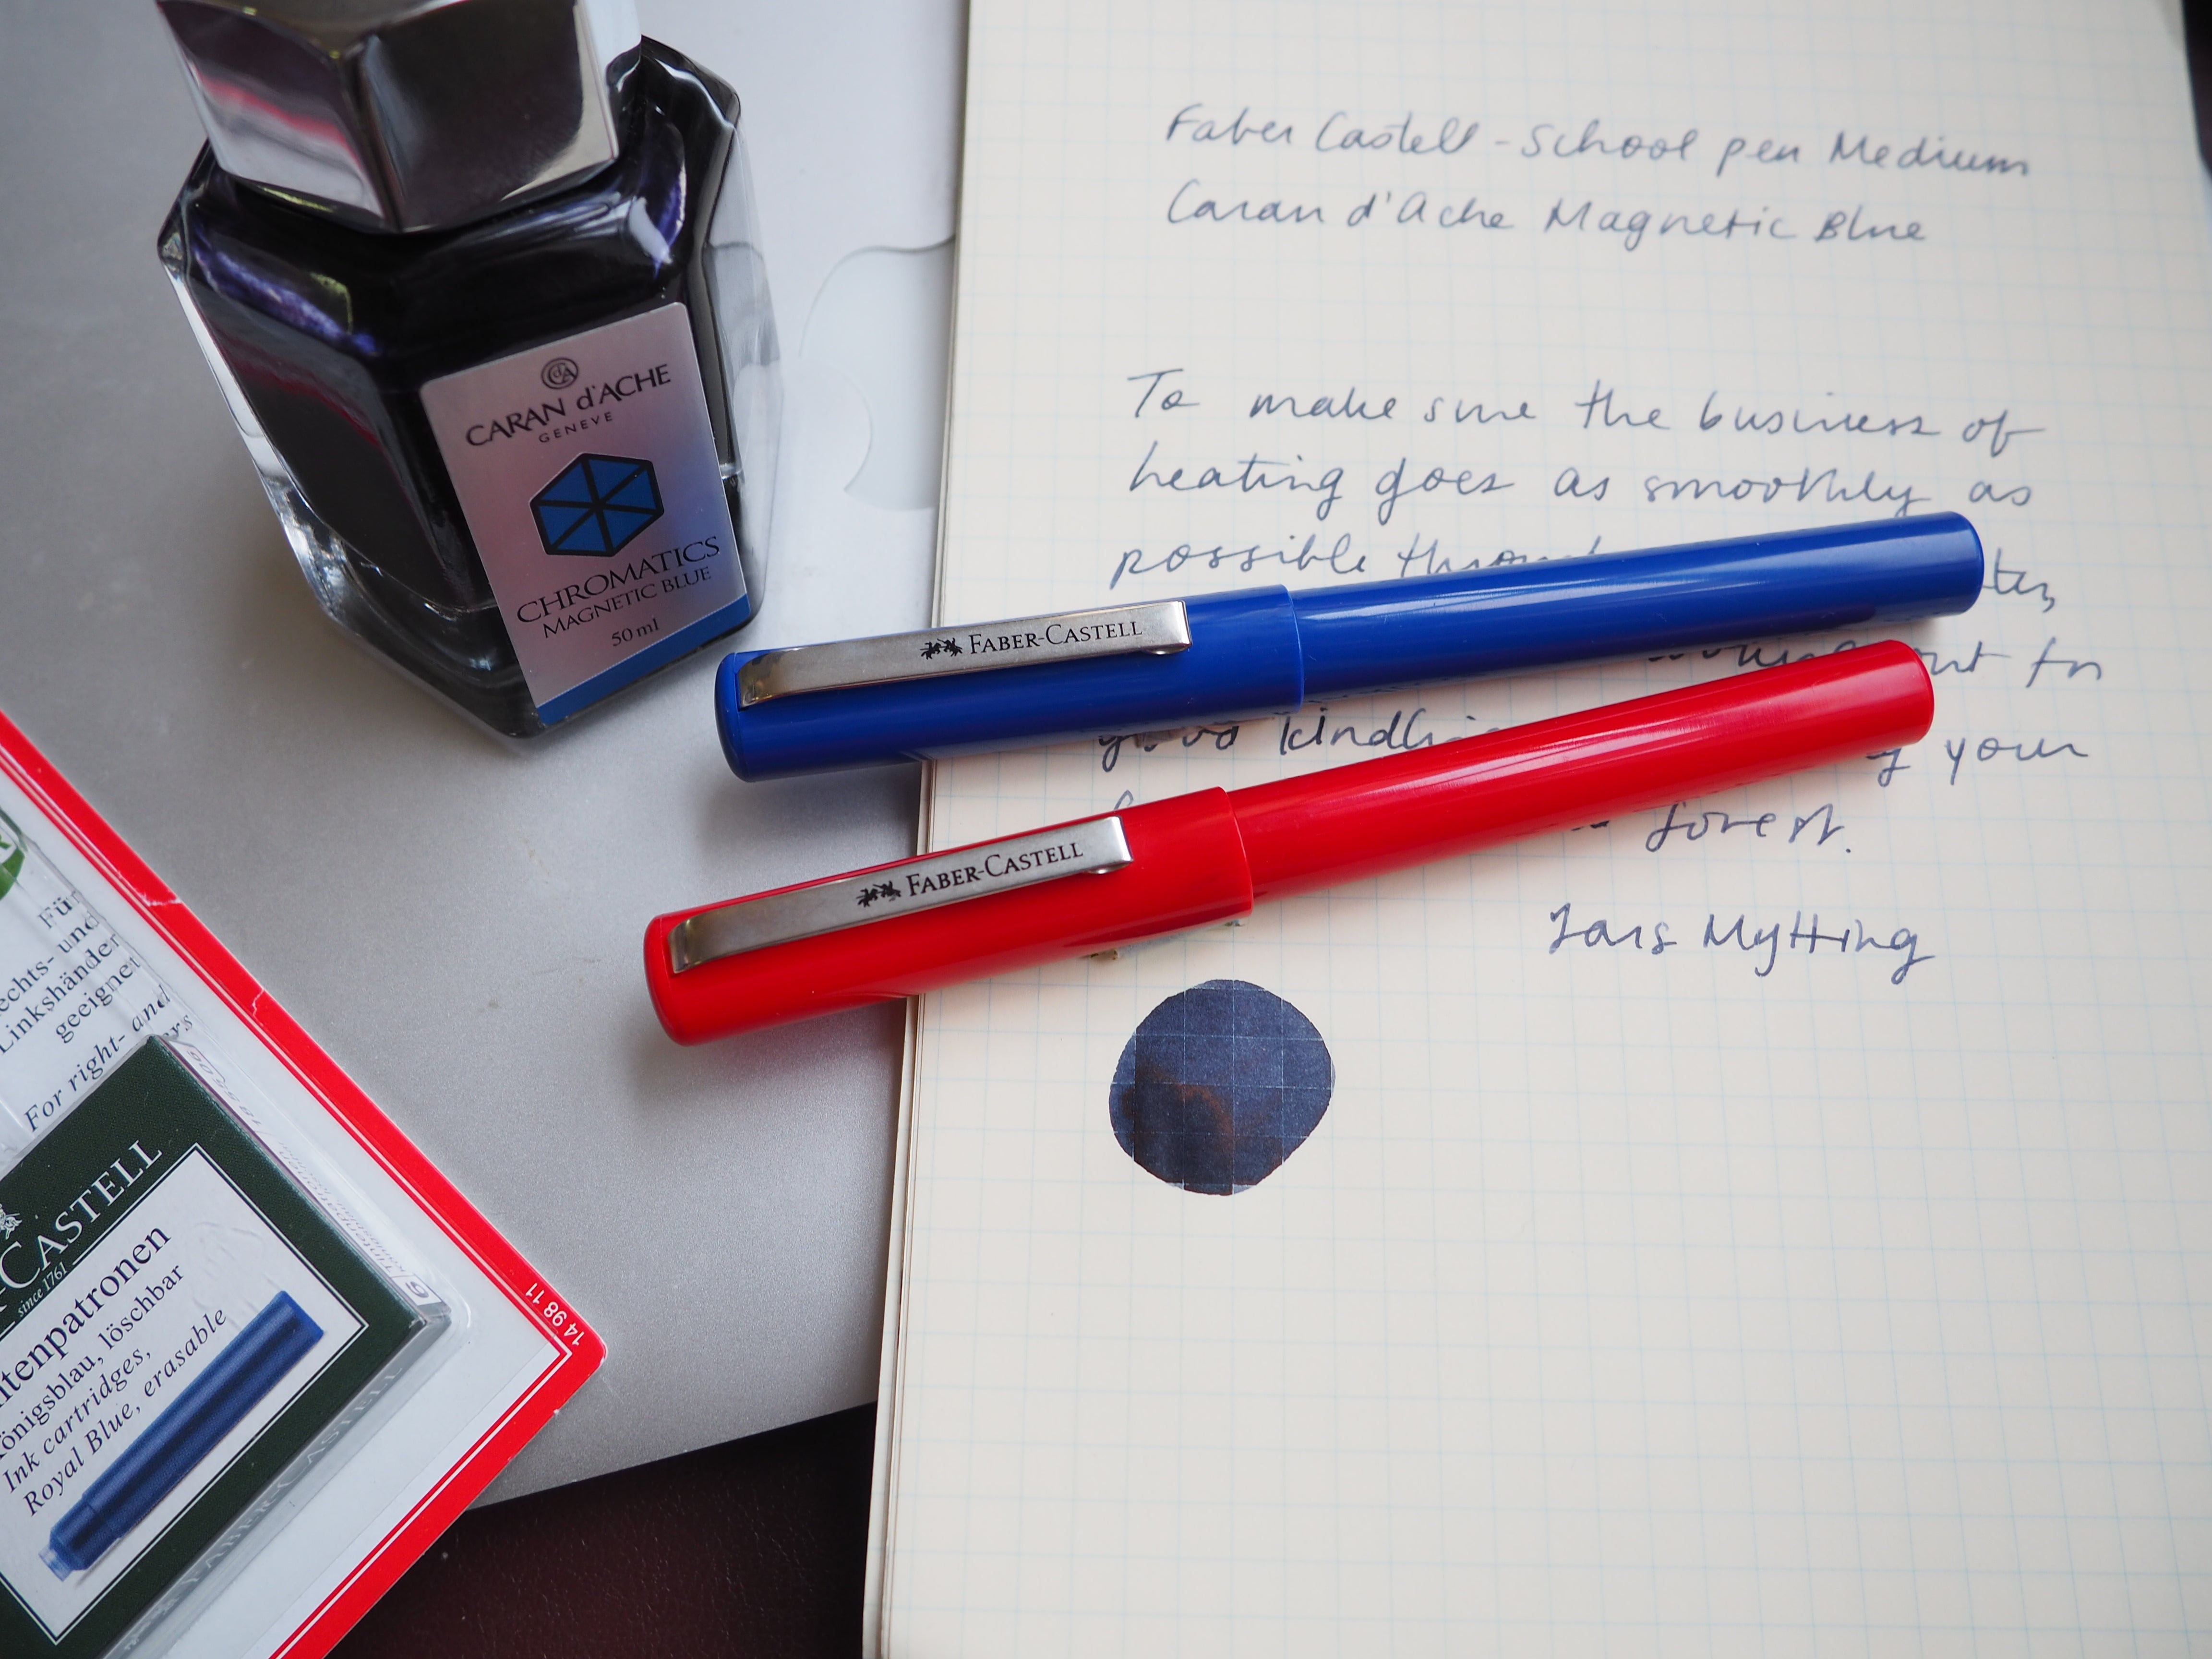 Early thoughts on the Faber-Castell Hexo fountain pen.